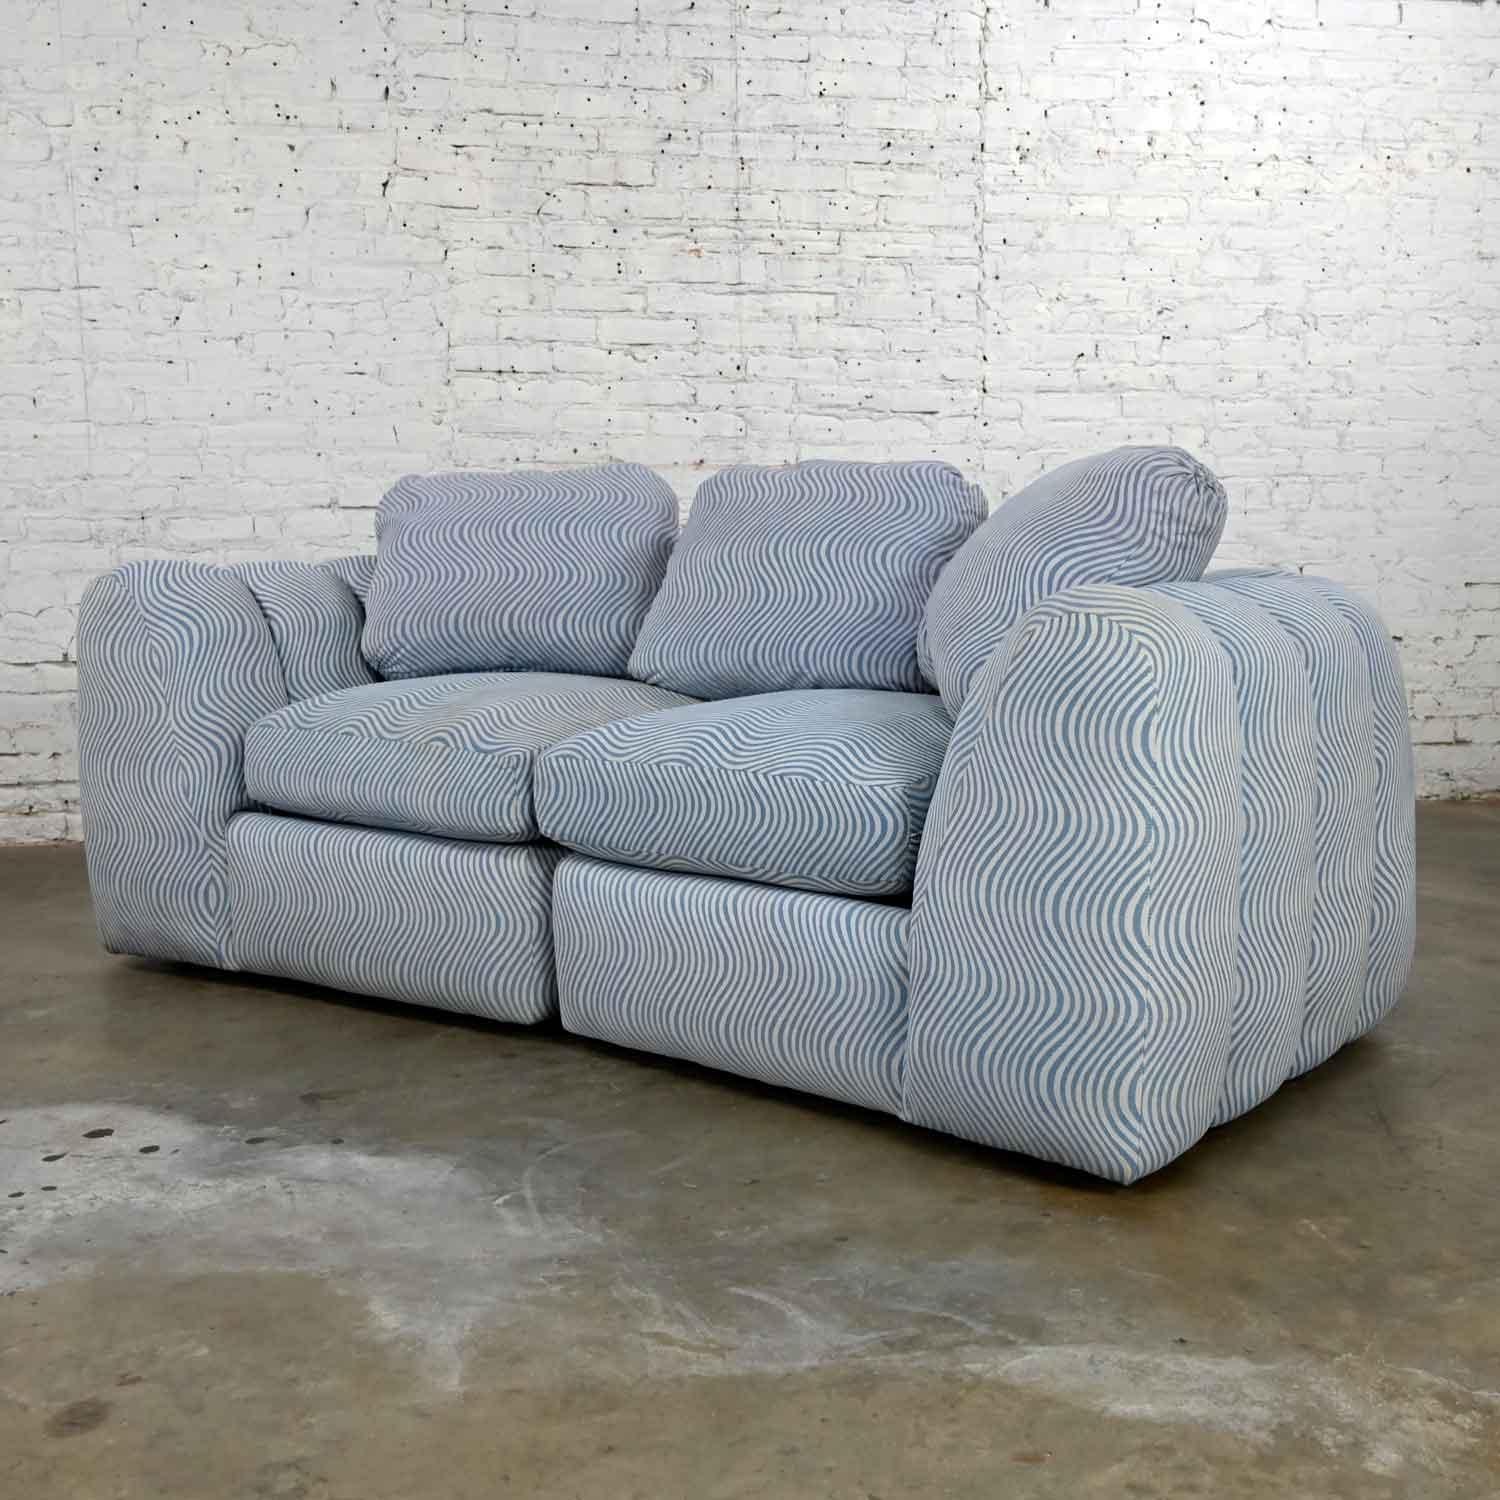 Post-Modern Modern Postmodern Channeled Sectional Loveseat Lounge Chairs Style Jay Spectre For Sale